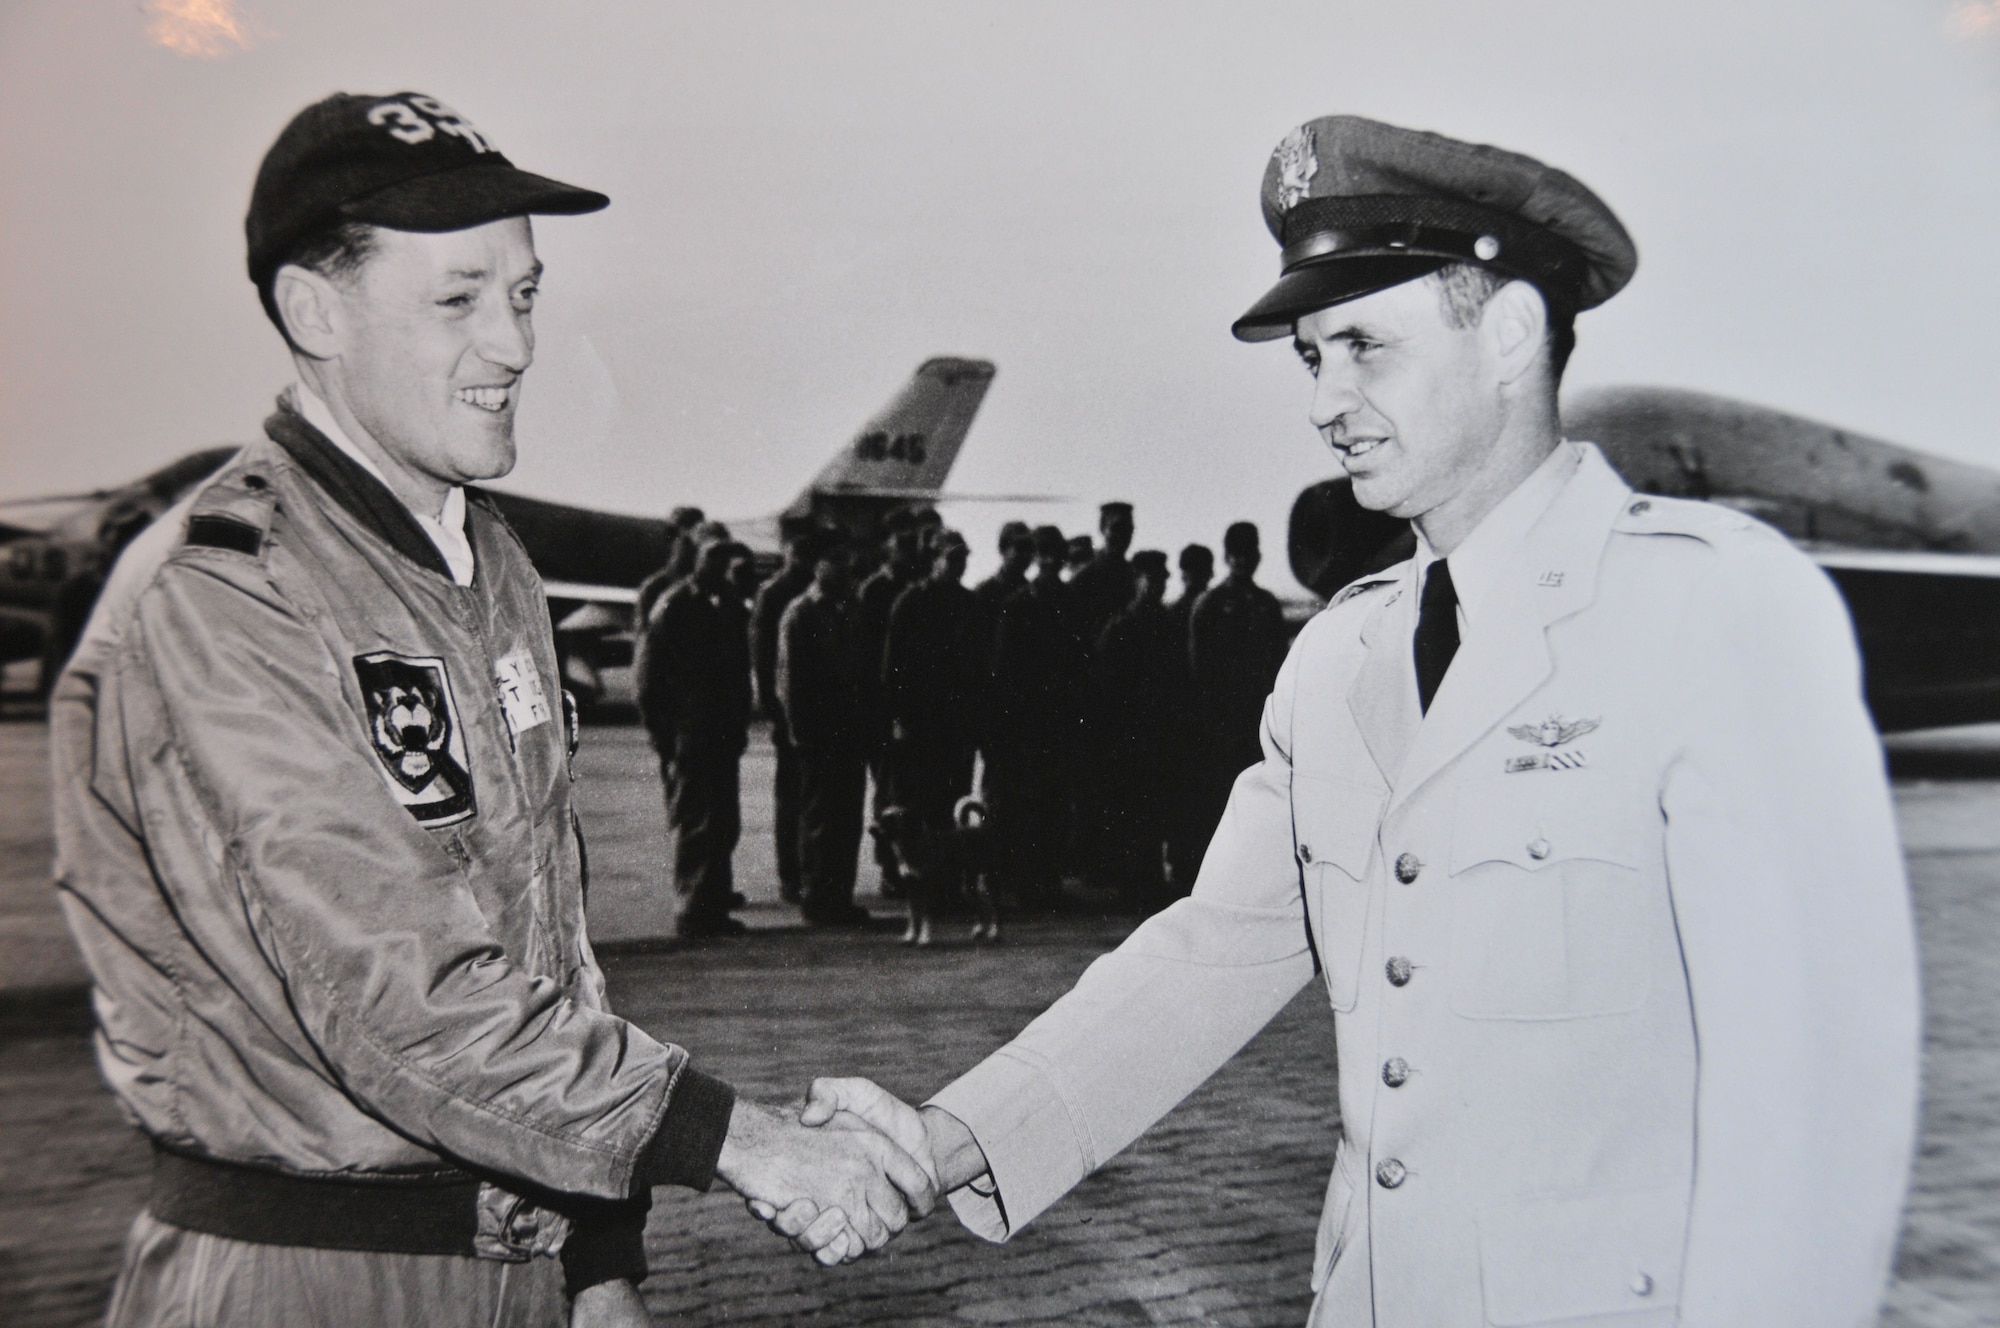 Air Force Capt. Kelly Cook (left), a pilot who flew early generation fighter bombers, shakes the hand of another officer circa 1950s. Cook, the father of 512th Airlift Wing Commander Col. Raymond A. Kozak’s wife Maureen, was a member of the Iowa Air National Guard when he was called to active federal service in support of the Korean War. Cook was later declared missing in action in 1967 after his F-4C was shot down over North Vietnam. (Submitted photo)